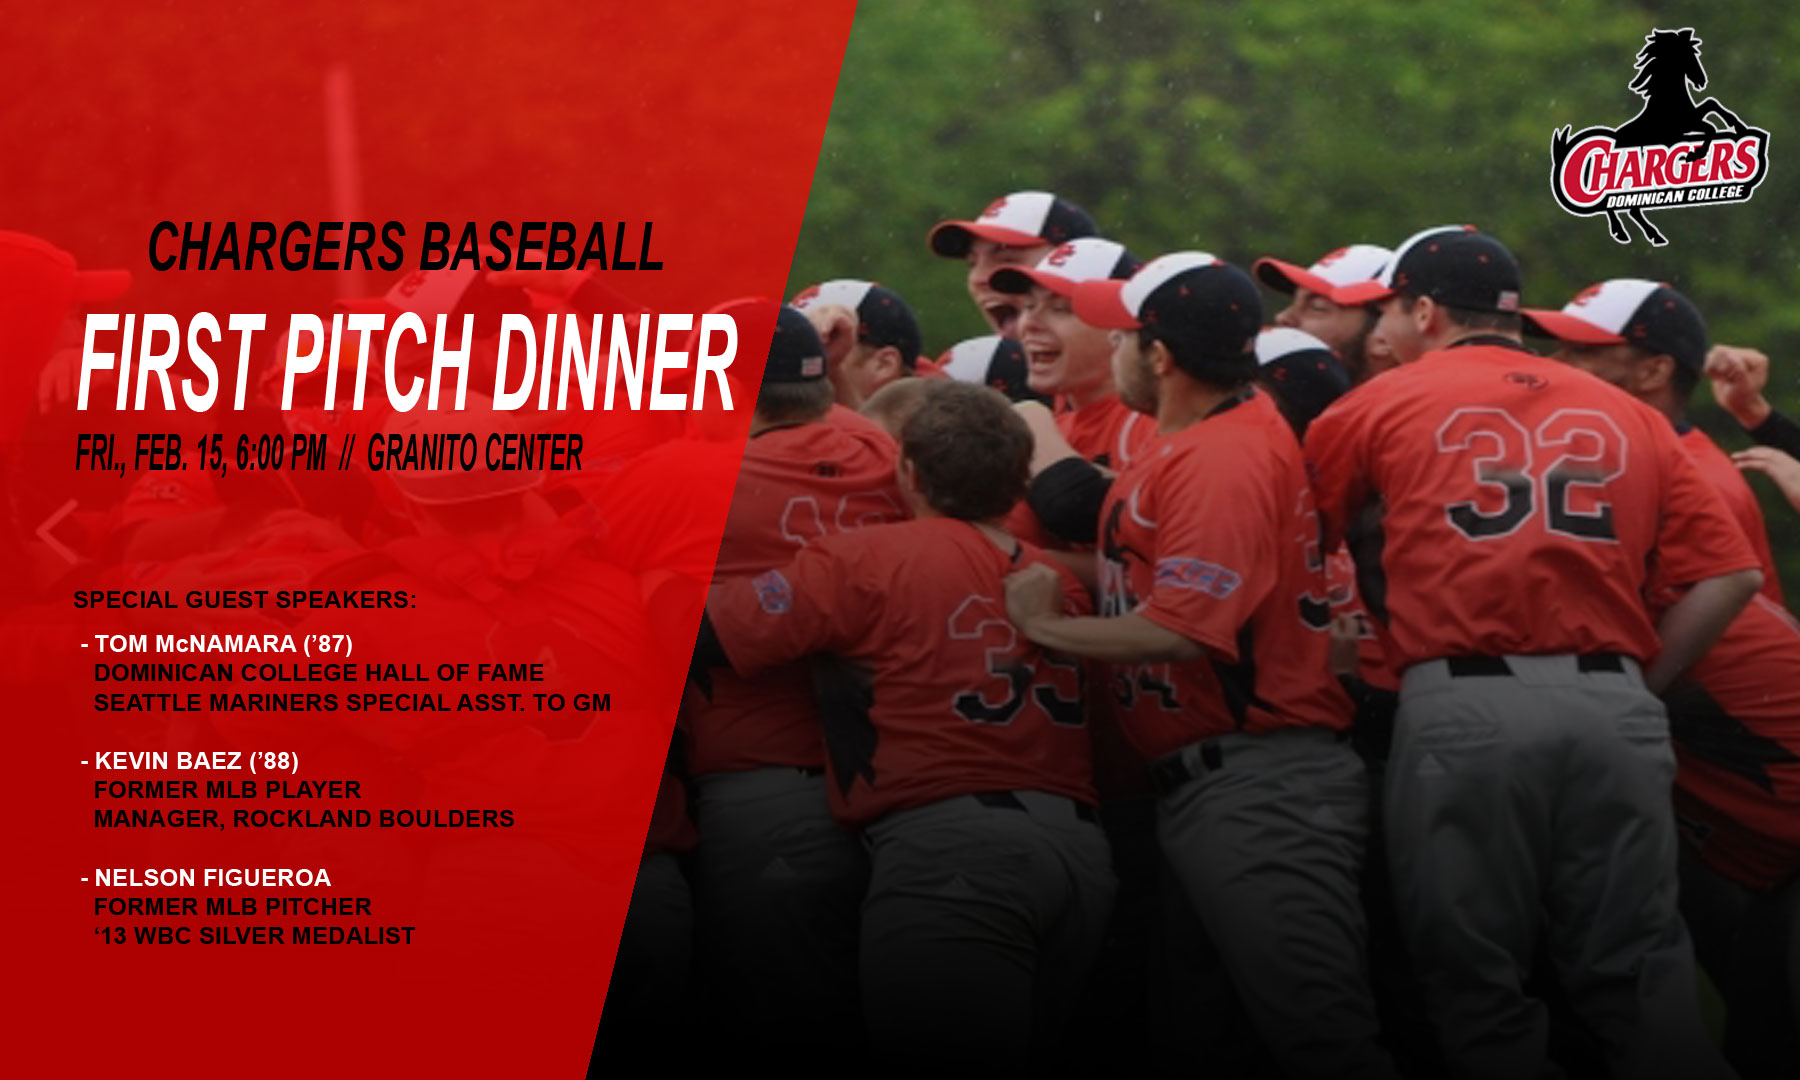 CHARGERS BASEBALL TO HOLD FIRST PITCH DINNER